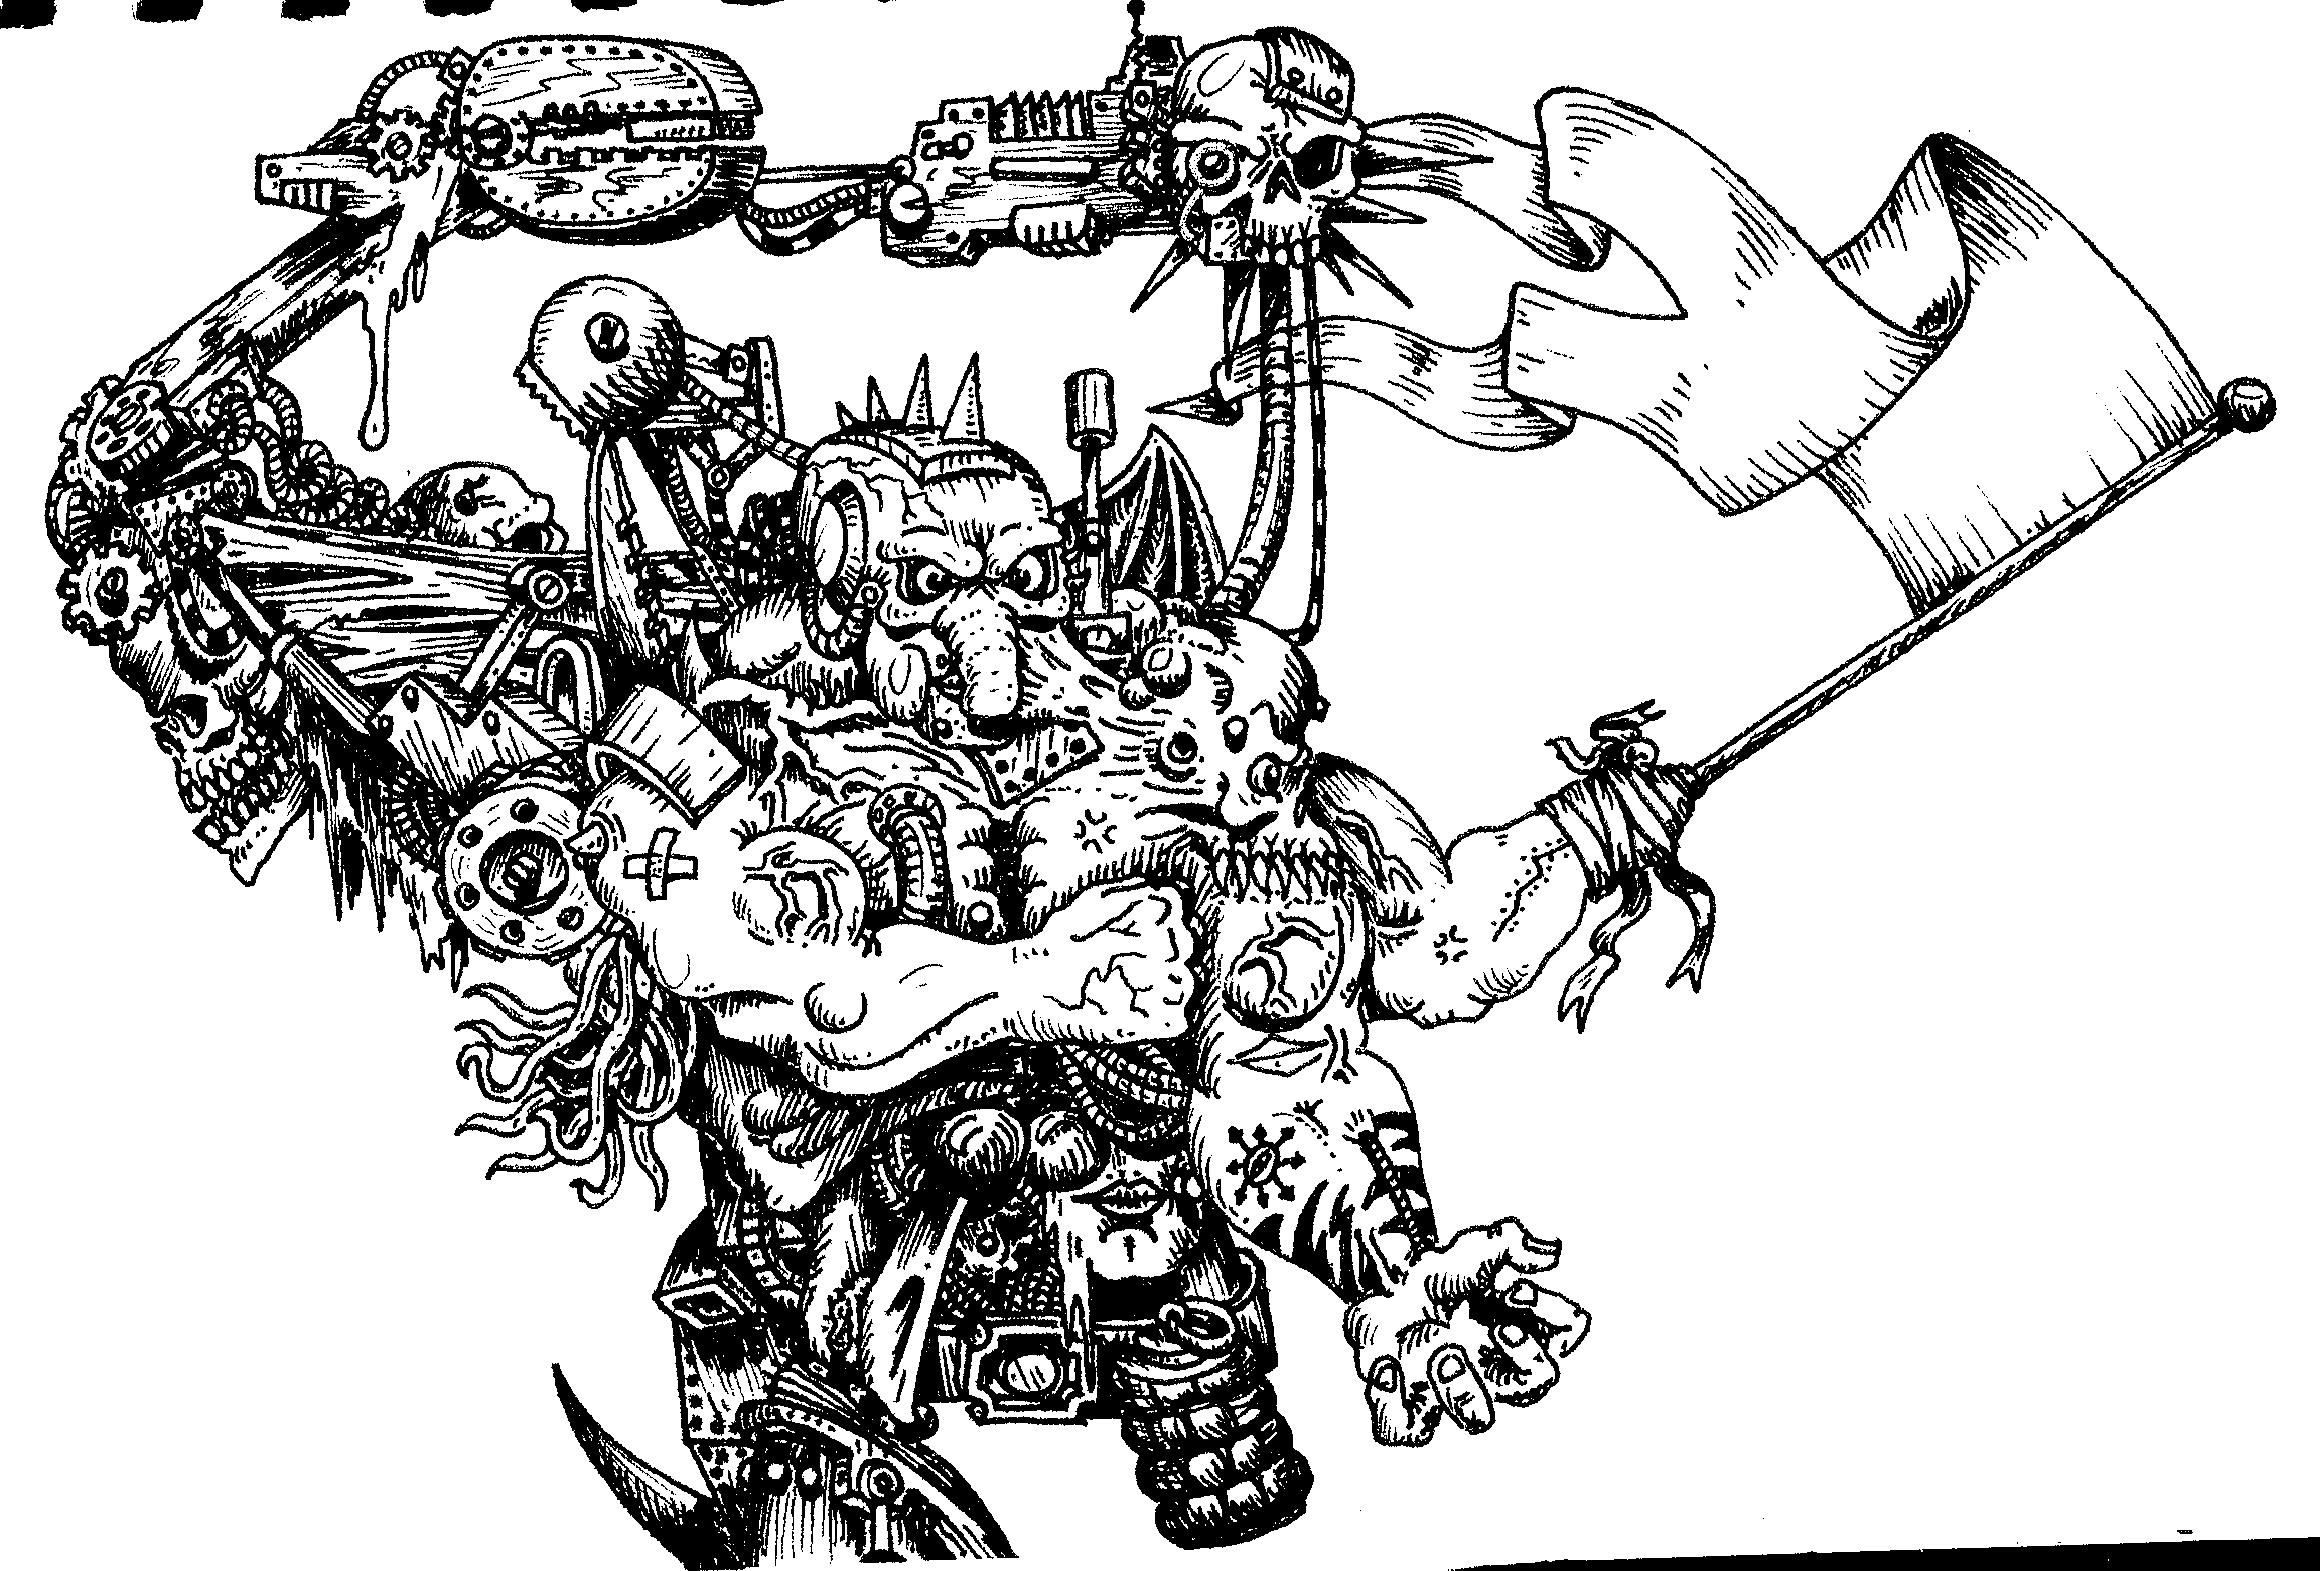 Artrawing, Artwork, Battlesuitd, Chaos, Codex, Conversion, Crisis Battlesuit, Drawing, Dreadnought, New, Old, School, Stone, Stonecreatures, Style, Tau, Weapon